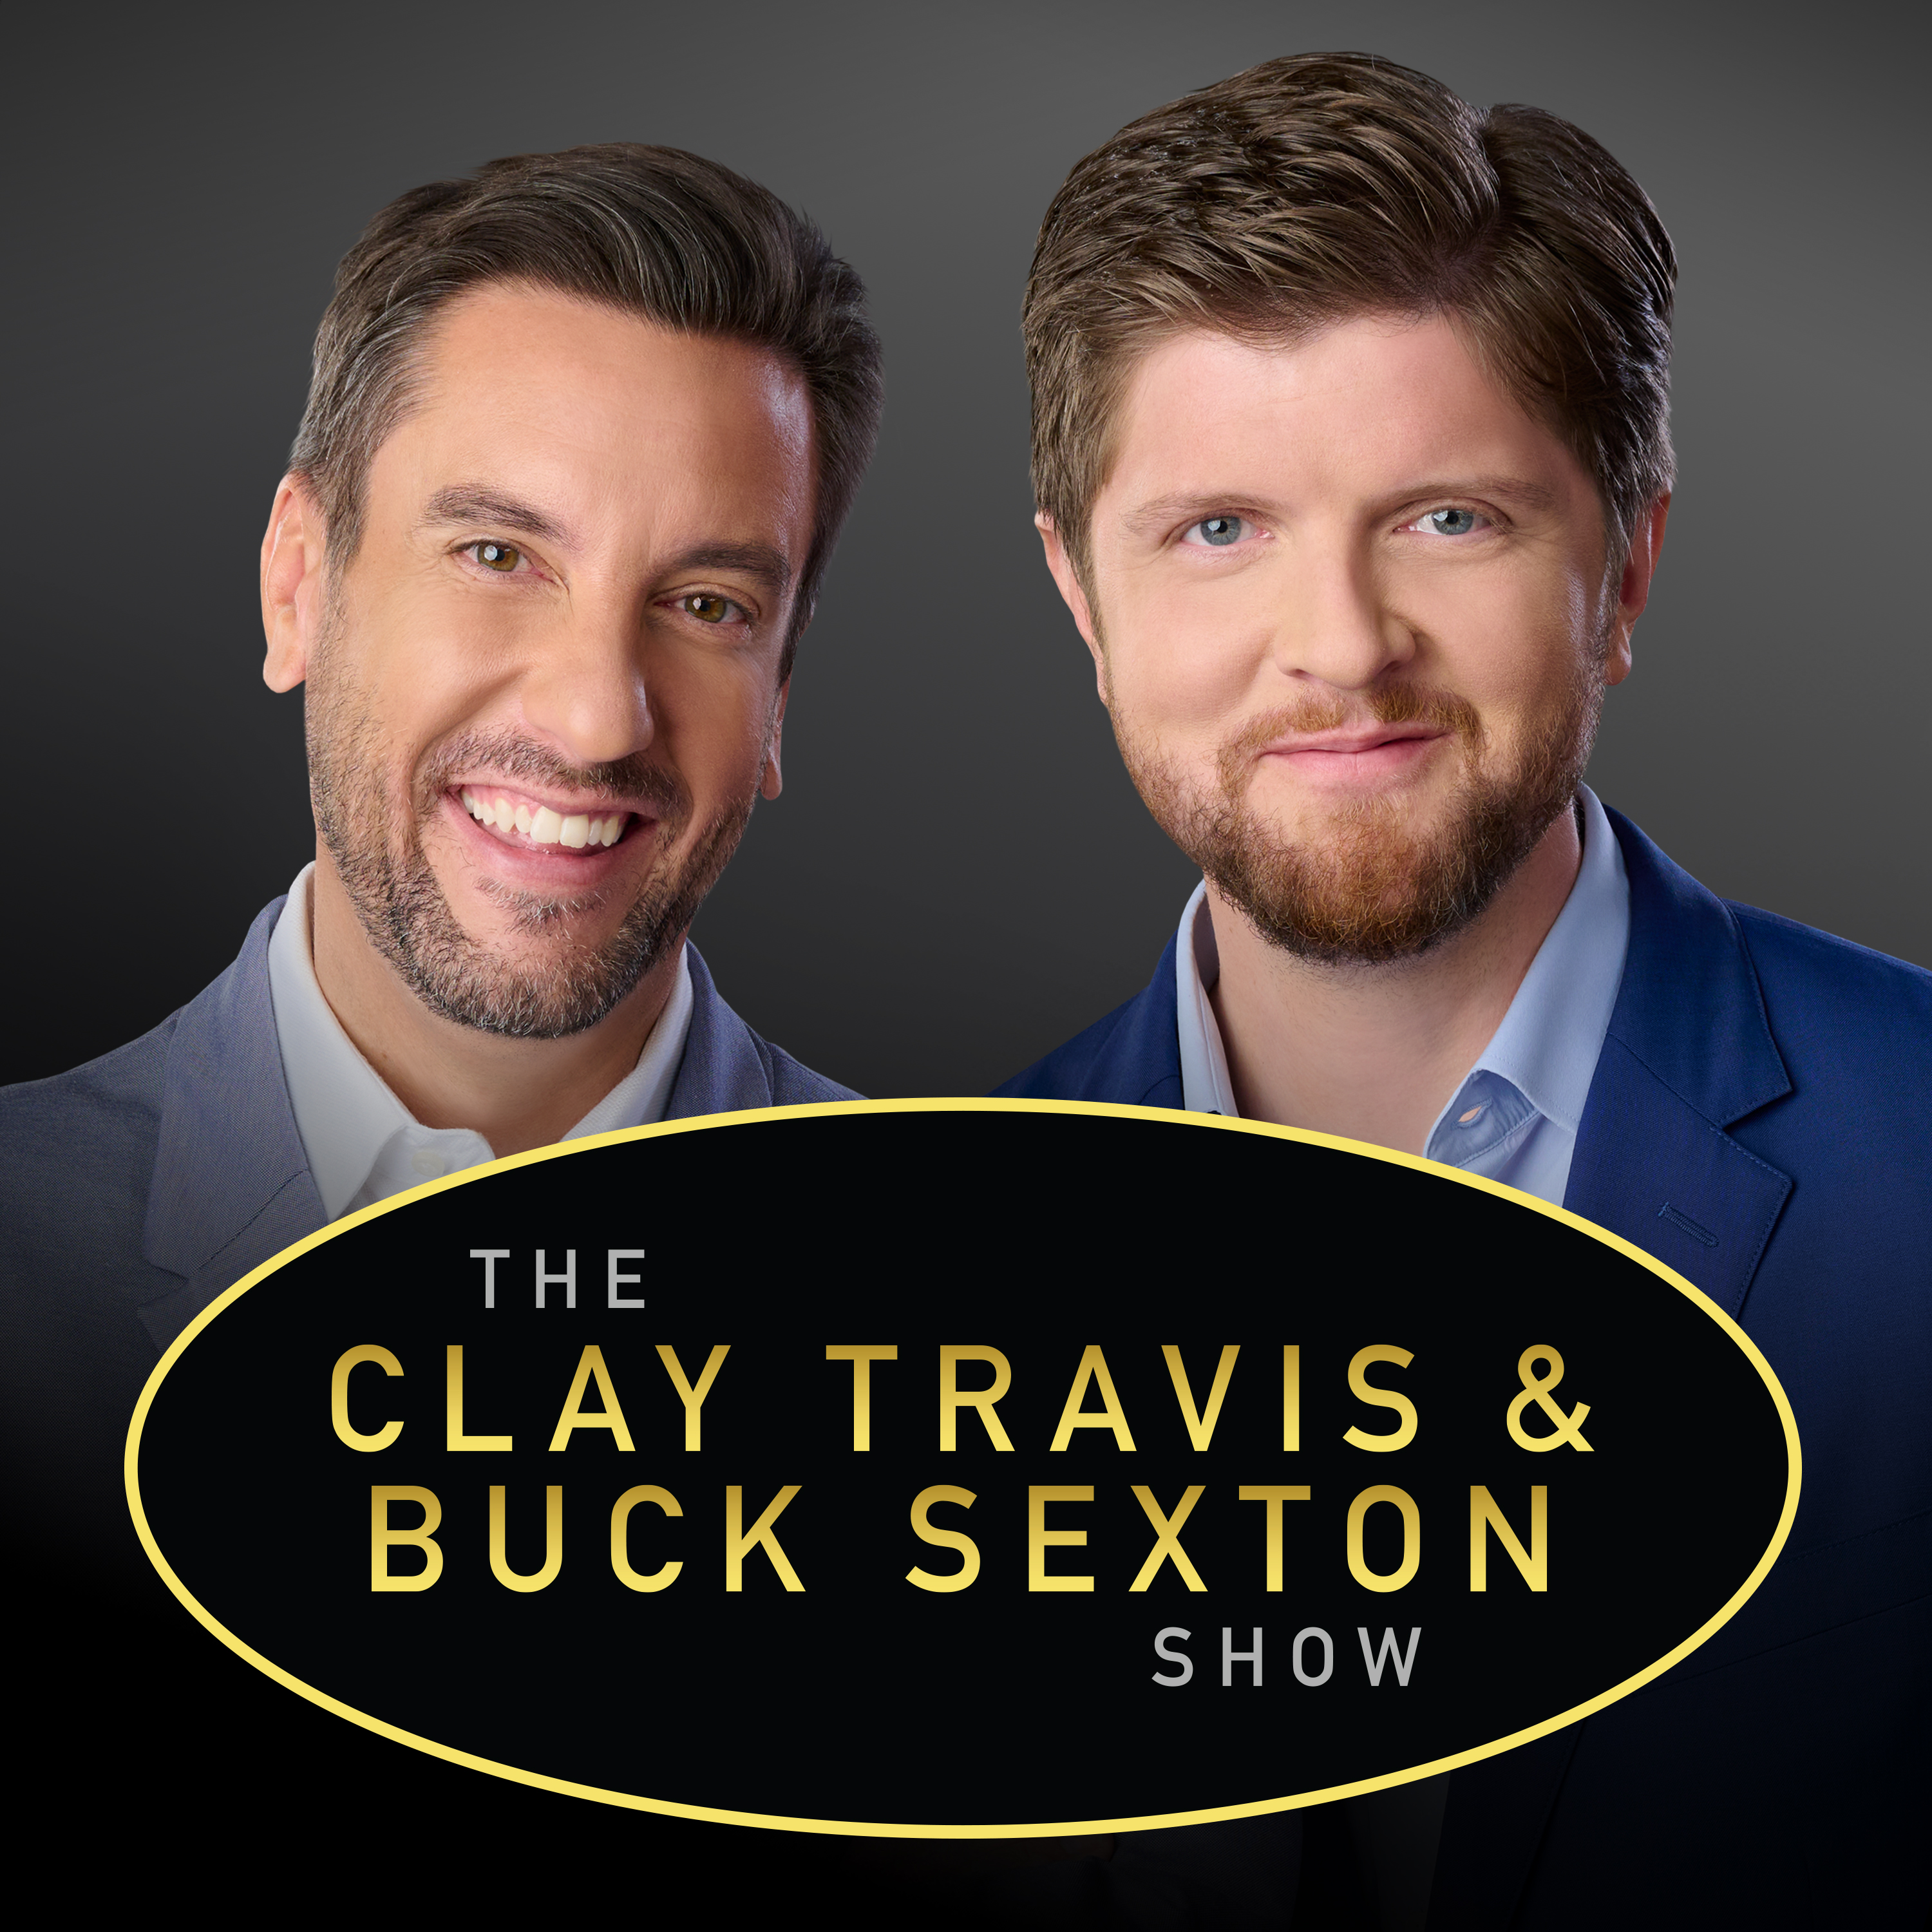 Clay Travis and Buck Sexton Show H2 – Sep 28 2022